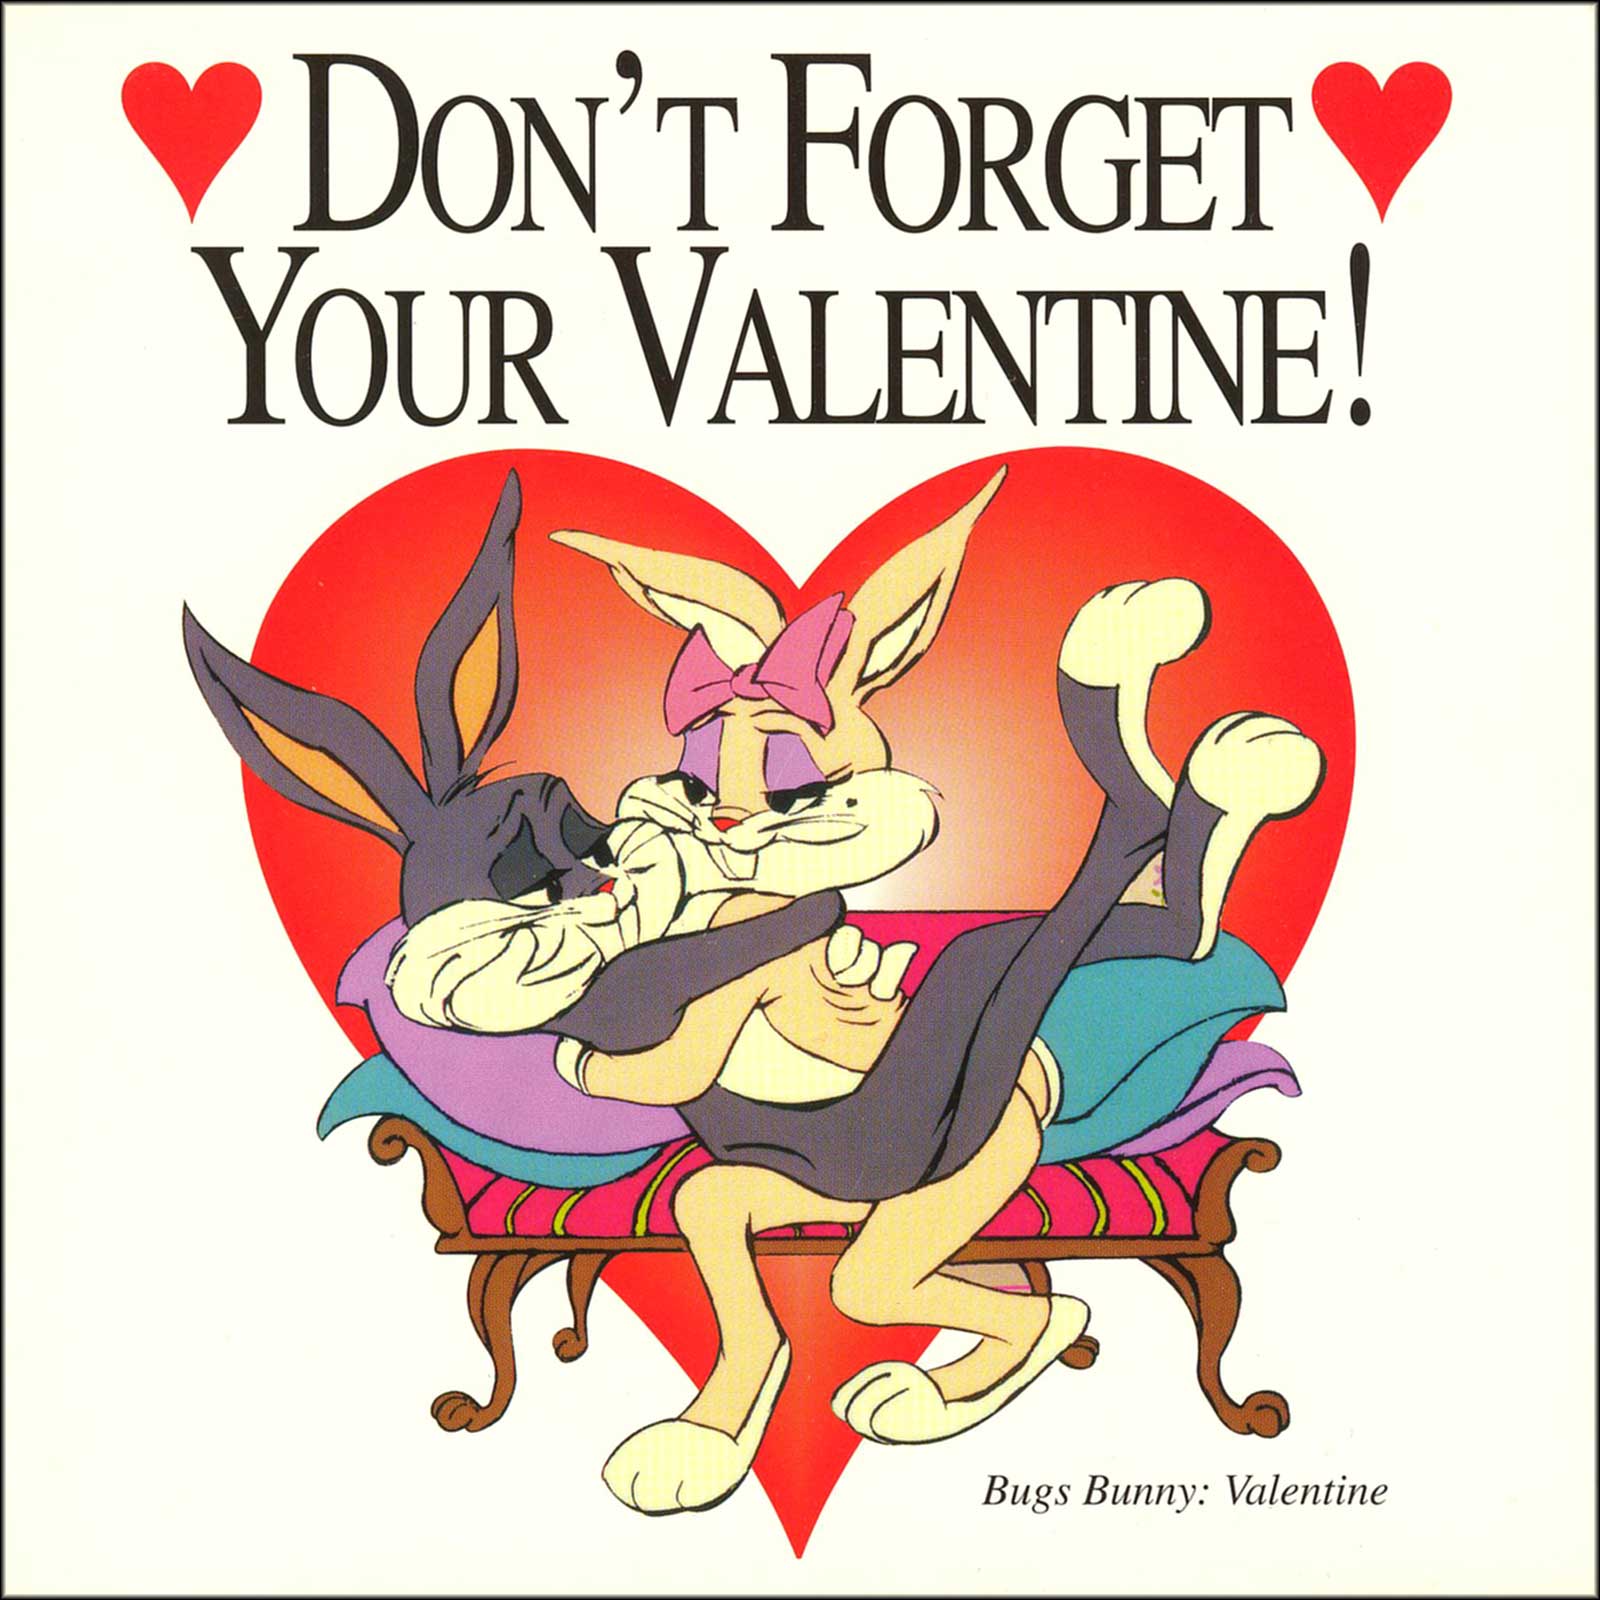 Don't forget your Valentine!